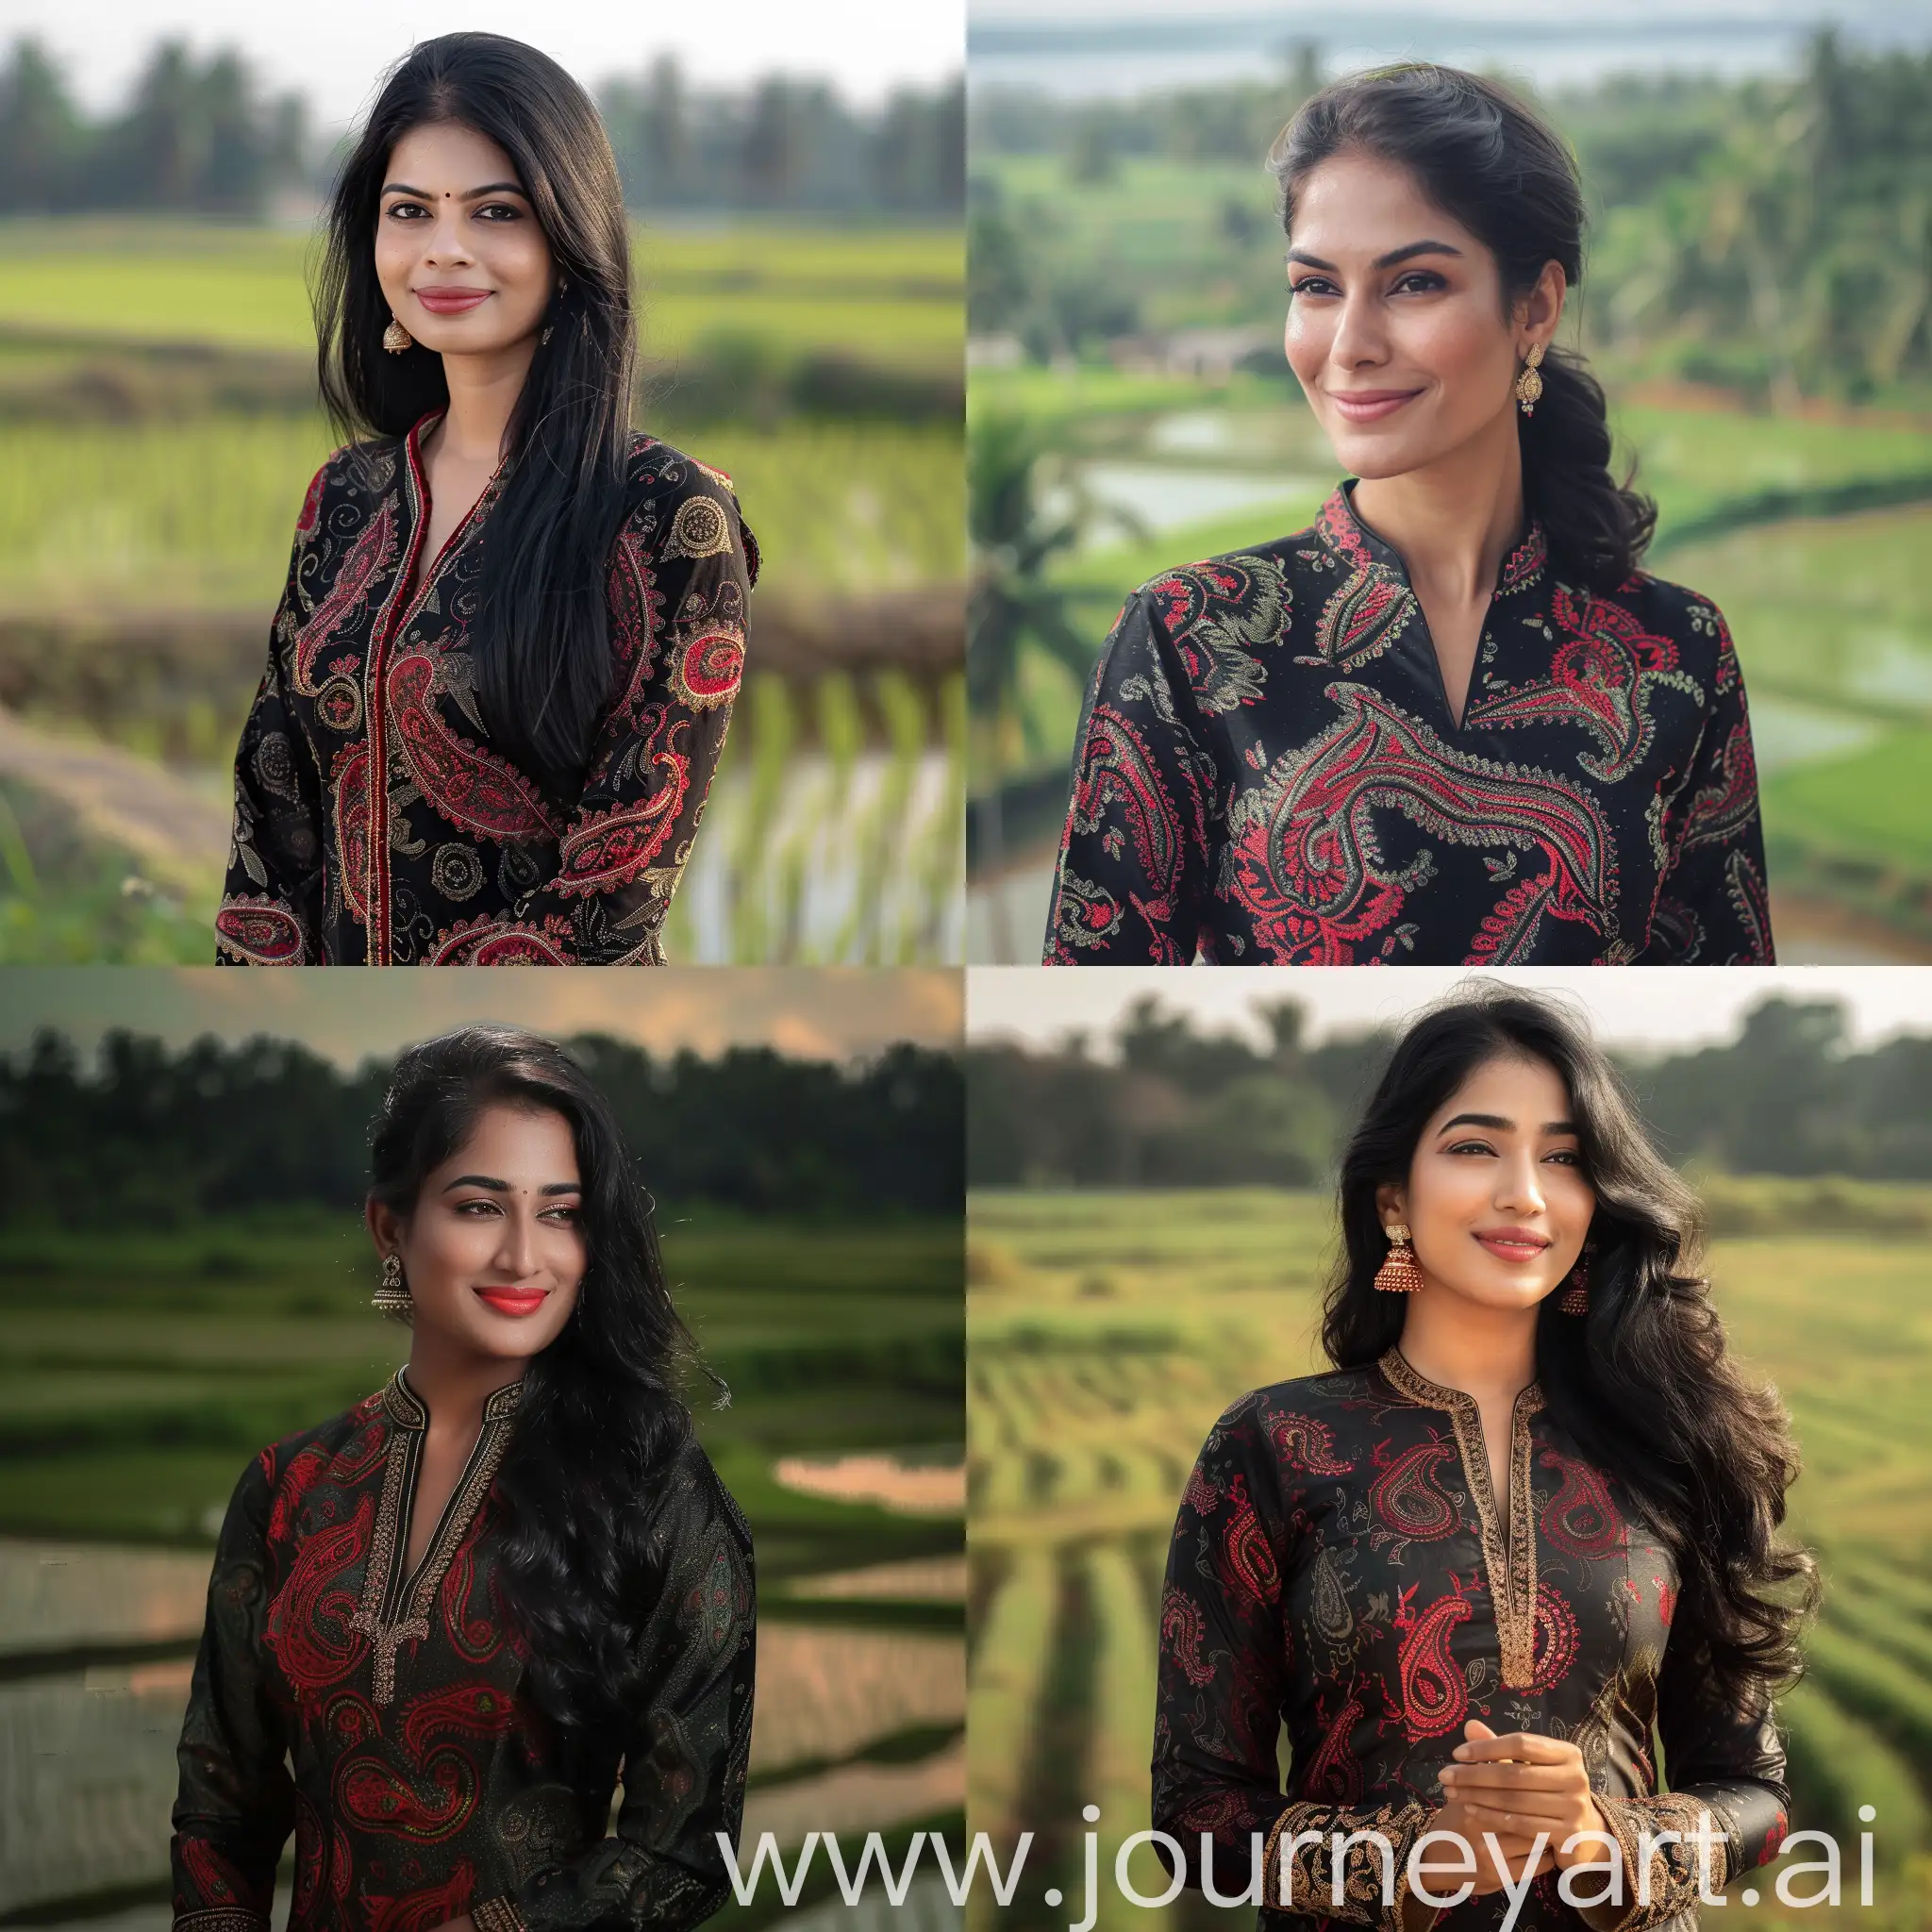 Smiling-Kerala-Woman-in-Glossy-Black-and-Red-Paisley-Kurti-amidst-Paddy-Fields